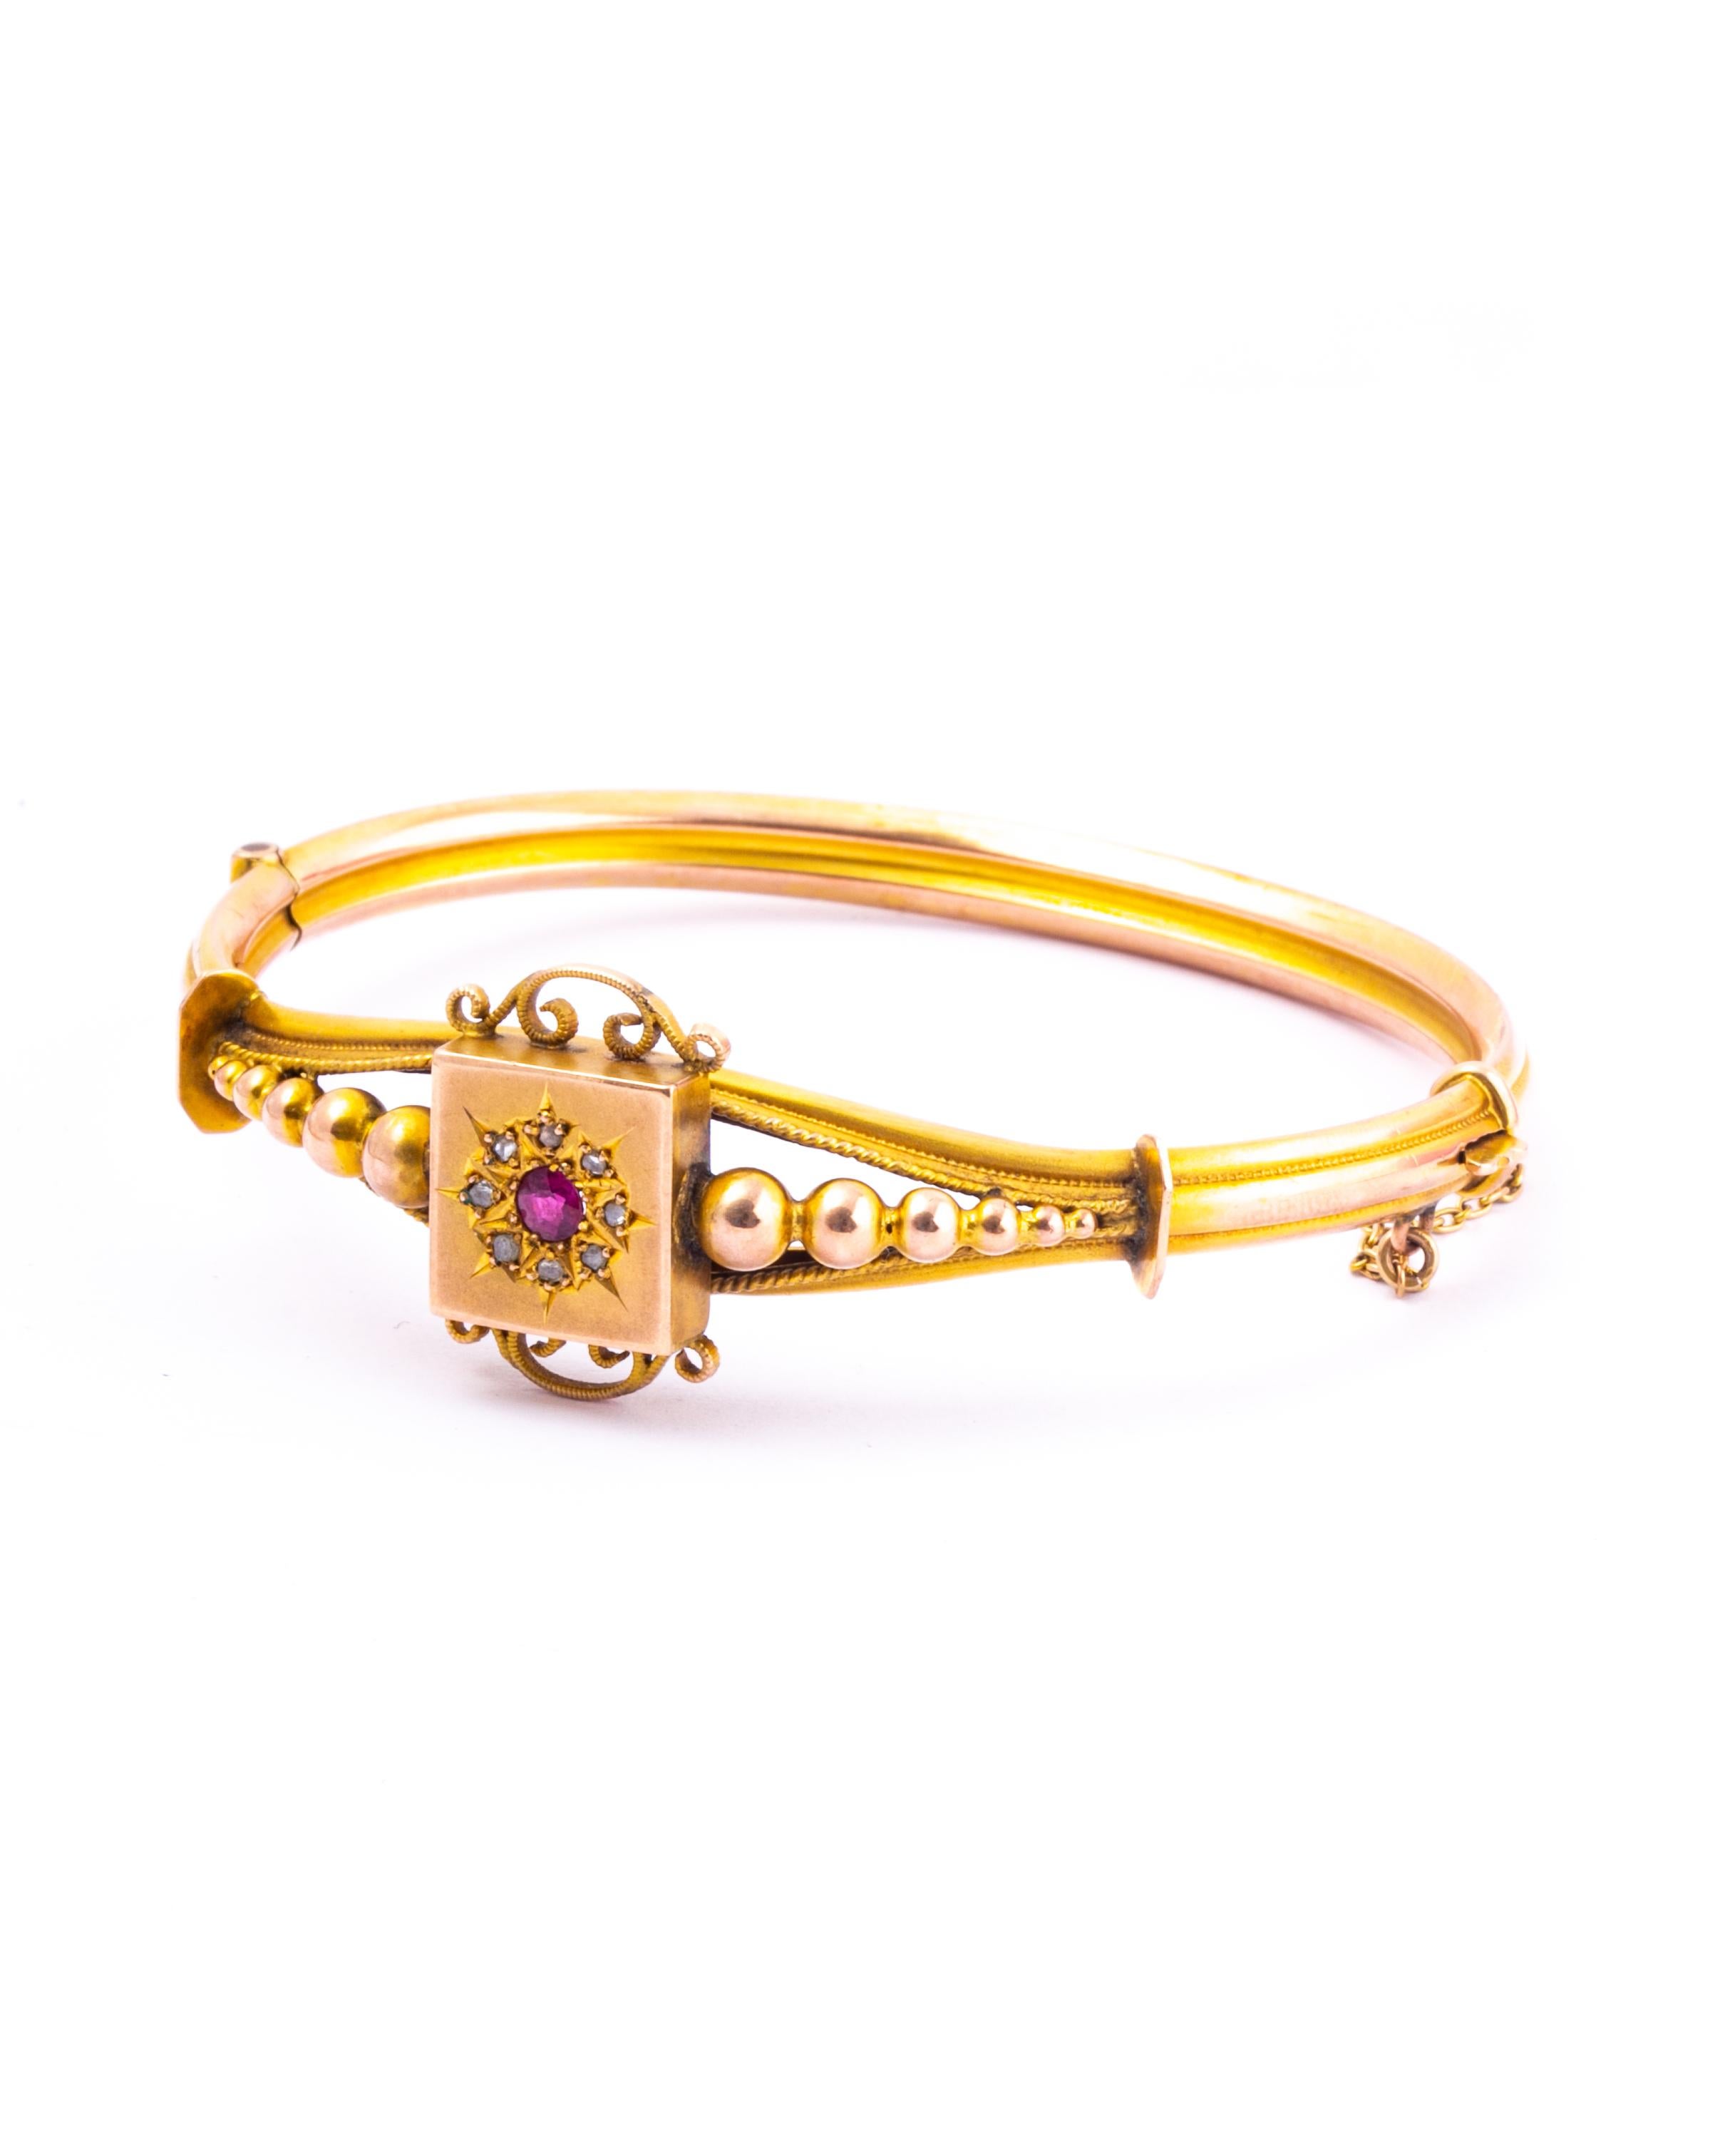 The 9 carat gold is glossy and the bangle has so much detail. The centre of the bangle holds a gorgeous and colourful ruby. Surrounding this is a halo of rose cut diamonds. Either side of the decorative panel is orb detailing. 

Inner Diameter: